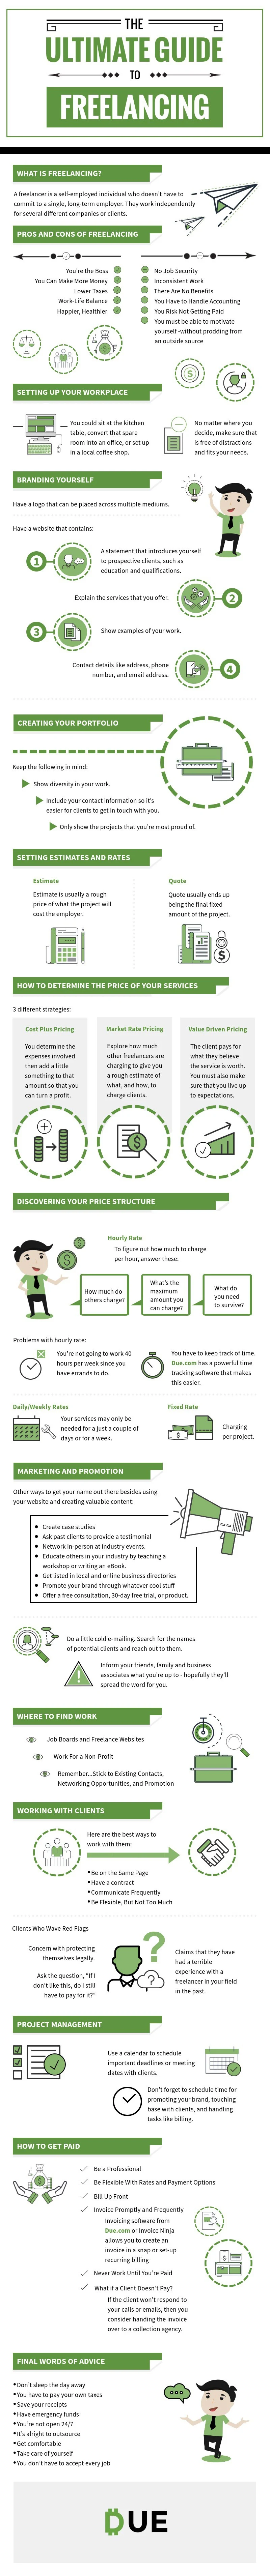 The Ultimate Guide to Freelancing - #infographic